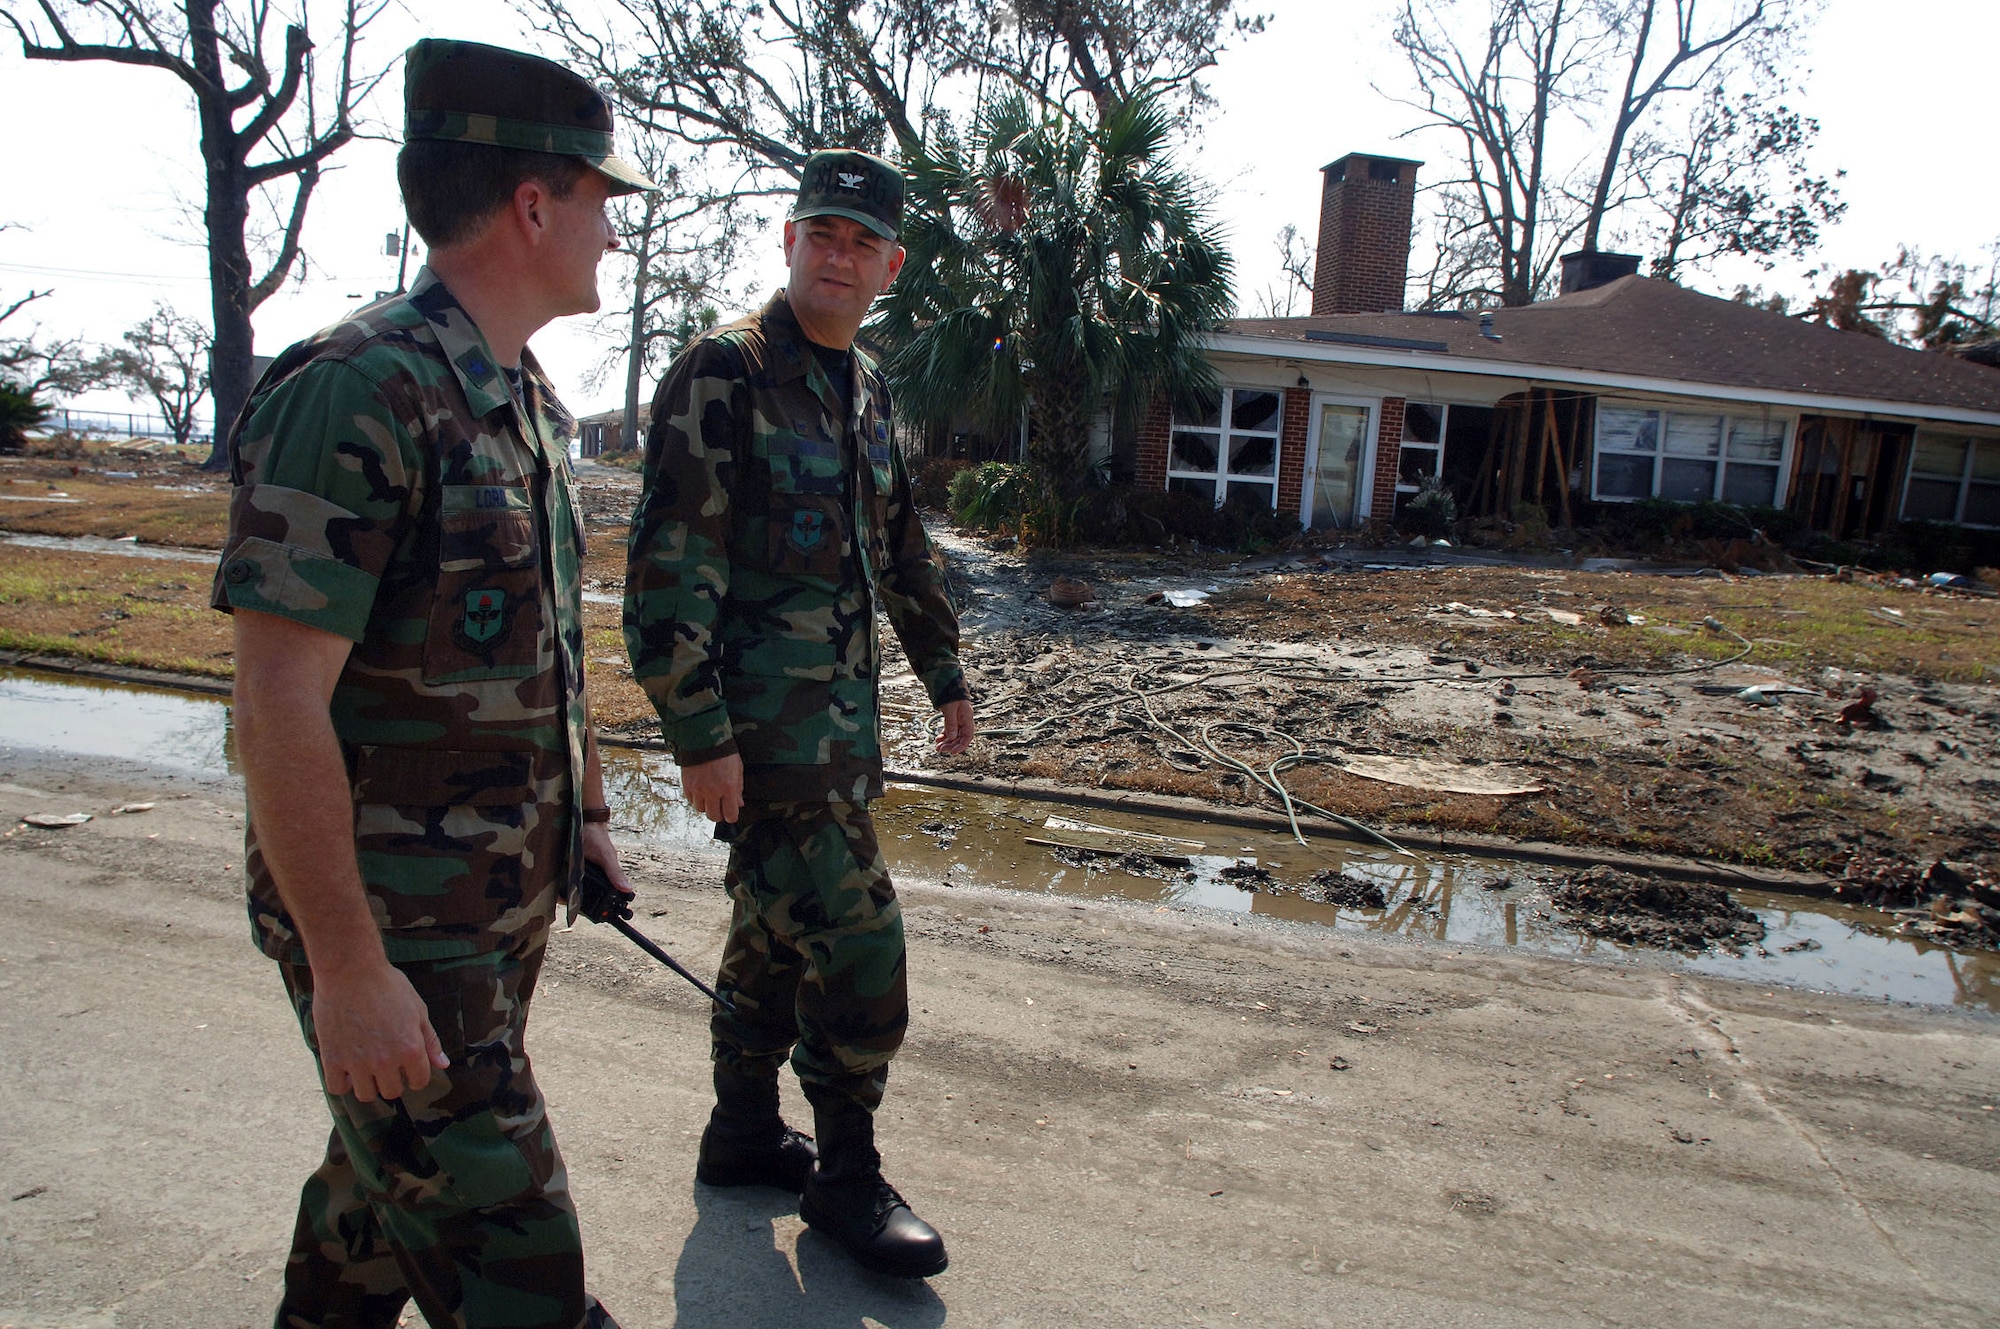 KEESLER AIR FORCE BASE, Miss. -- Brig. Gen. William T. Lord (left) walks with Col. Bruce Bush in a housing area here that was hit by Hurricane Katrina.  General Lord is the 81st Training Wing commander, and Colonel Bush is the 81st Mission Support Group commander.  (U.S. Air Force photo by Master Sgt. Efrain Gonzalez)